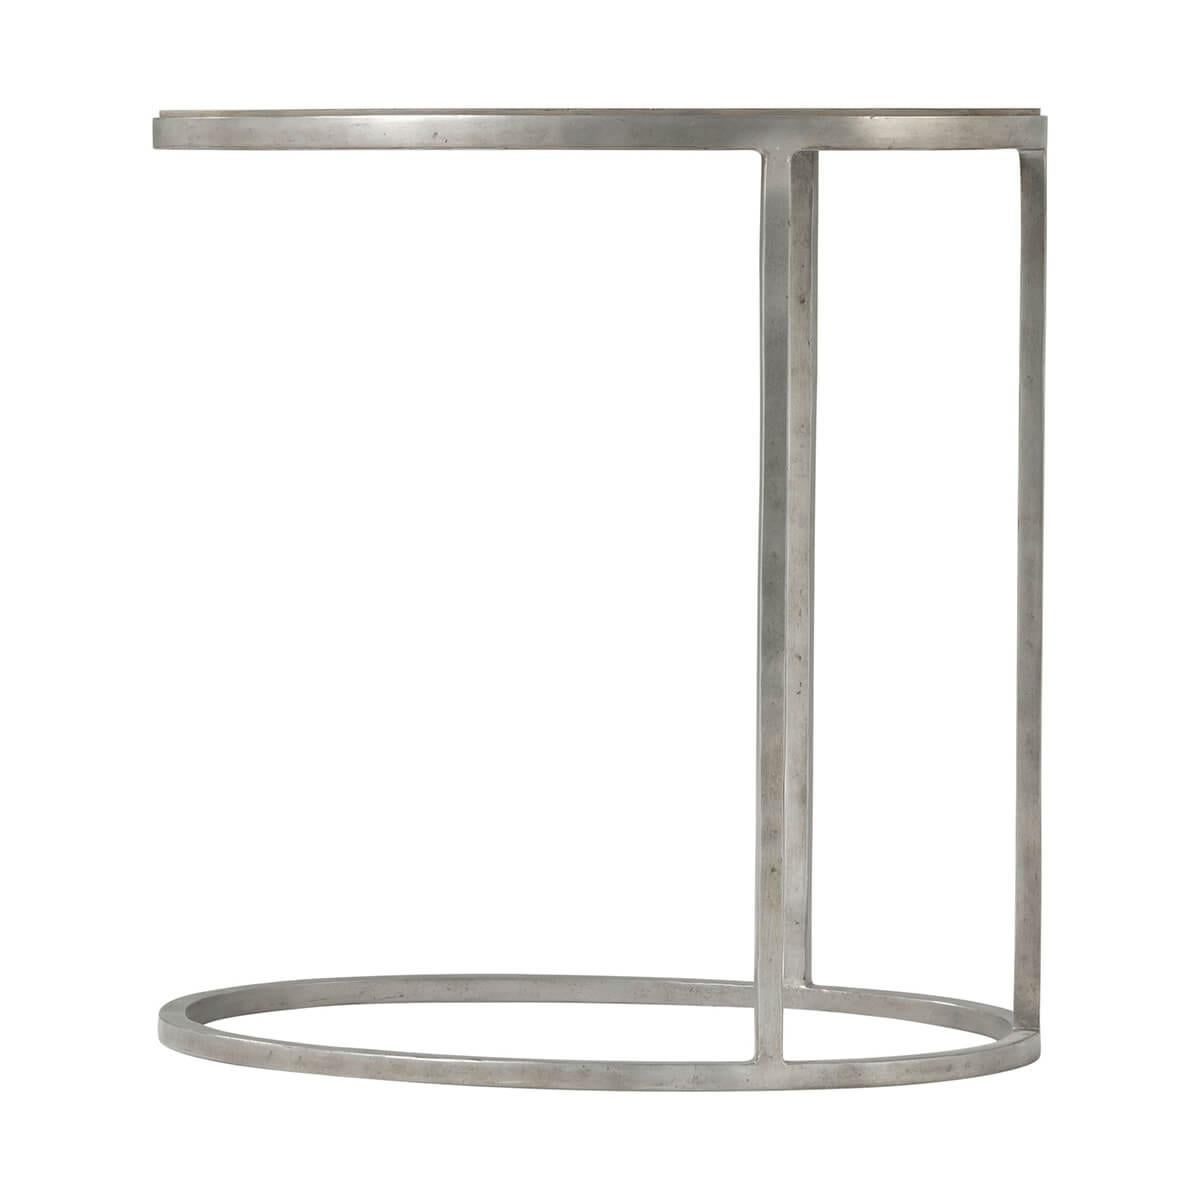 Industrial Oval Sunburst Accent Table - Grey Oak In New Condition For Sale In Westwood, NJ